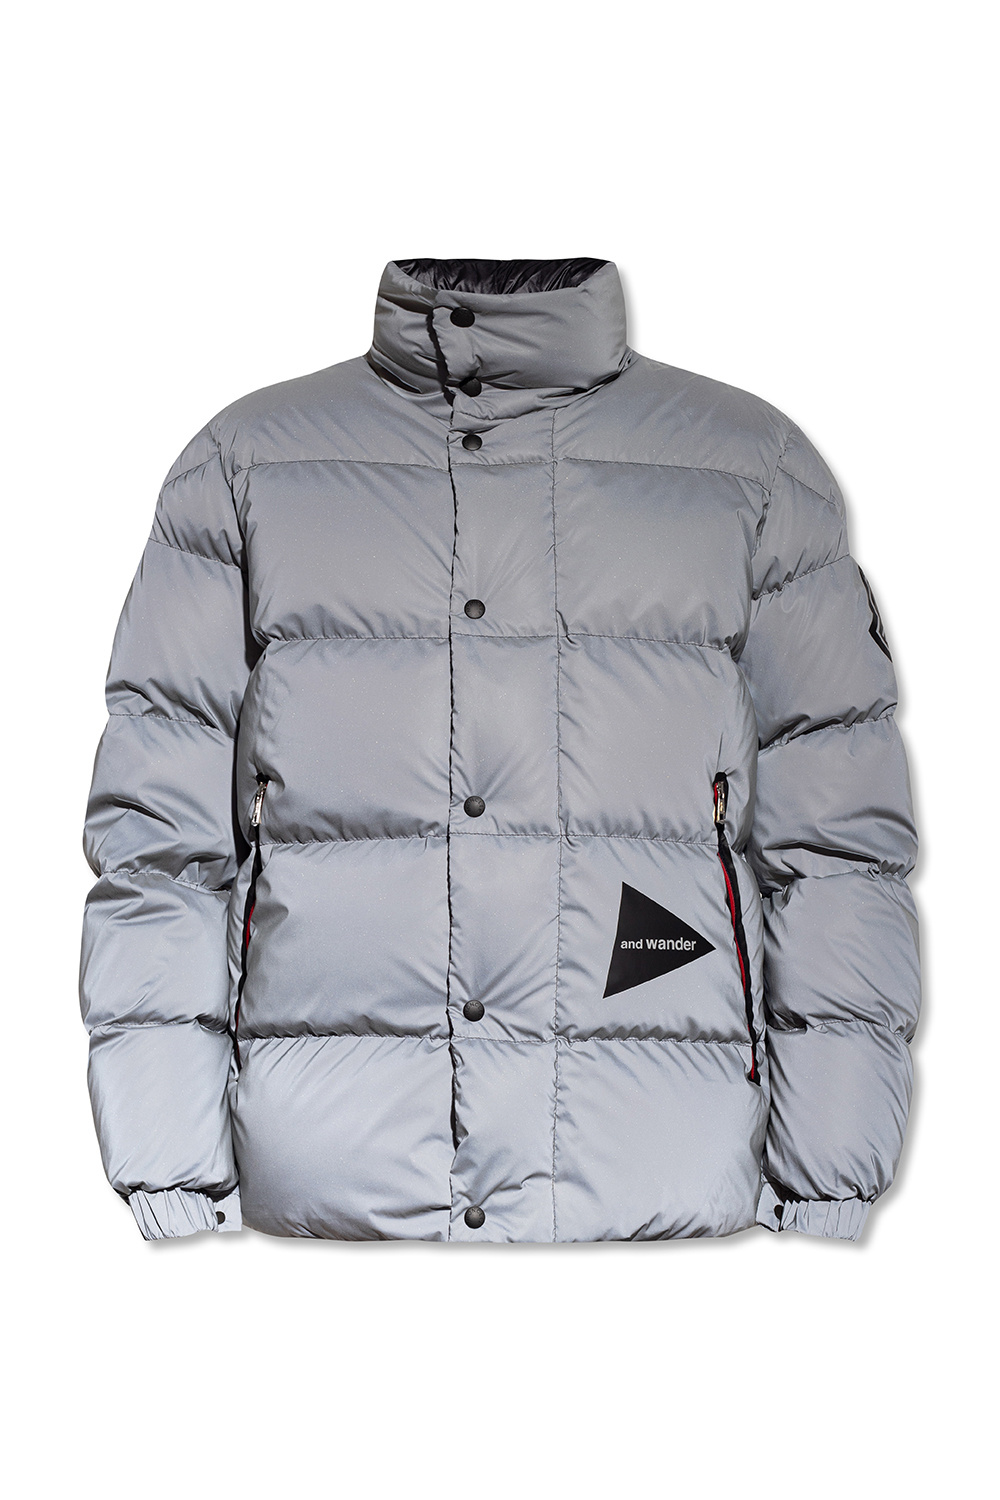 JmksportShops | Moncler Moncler 'and wander' | approach quilted 